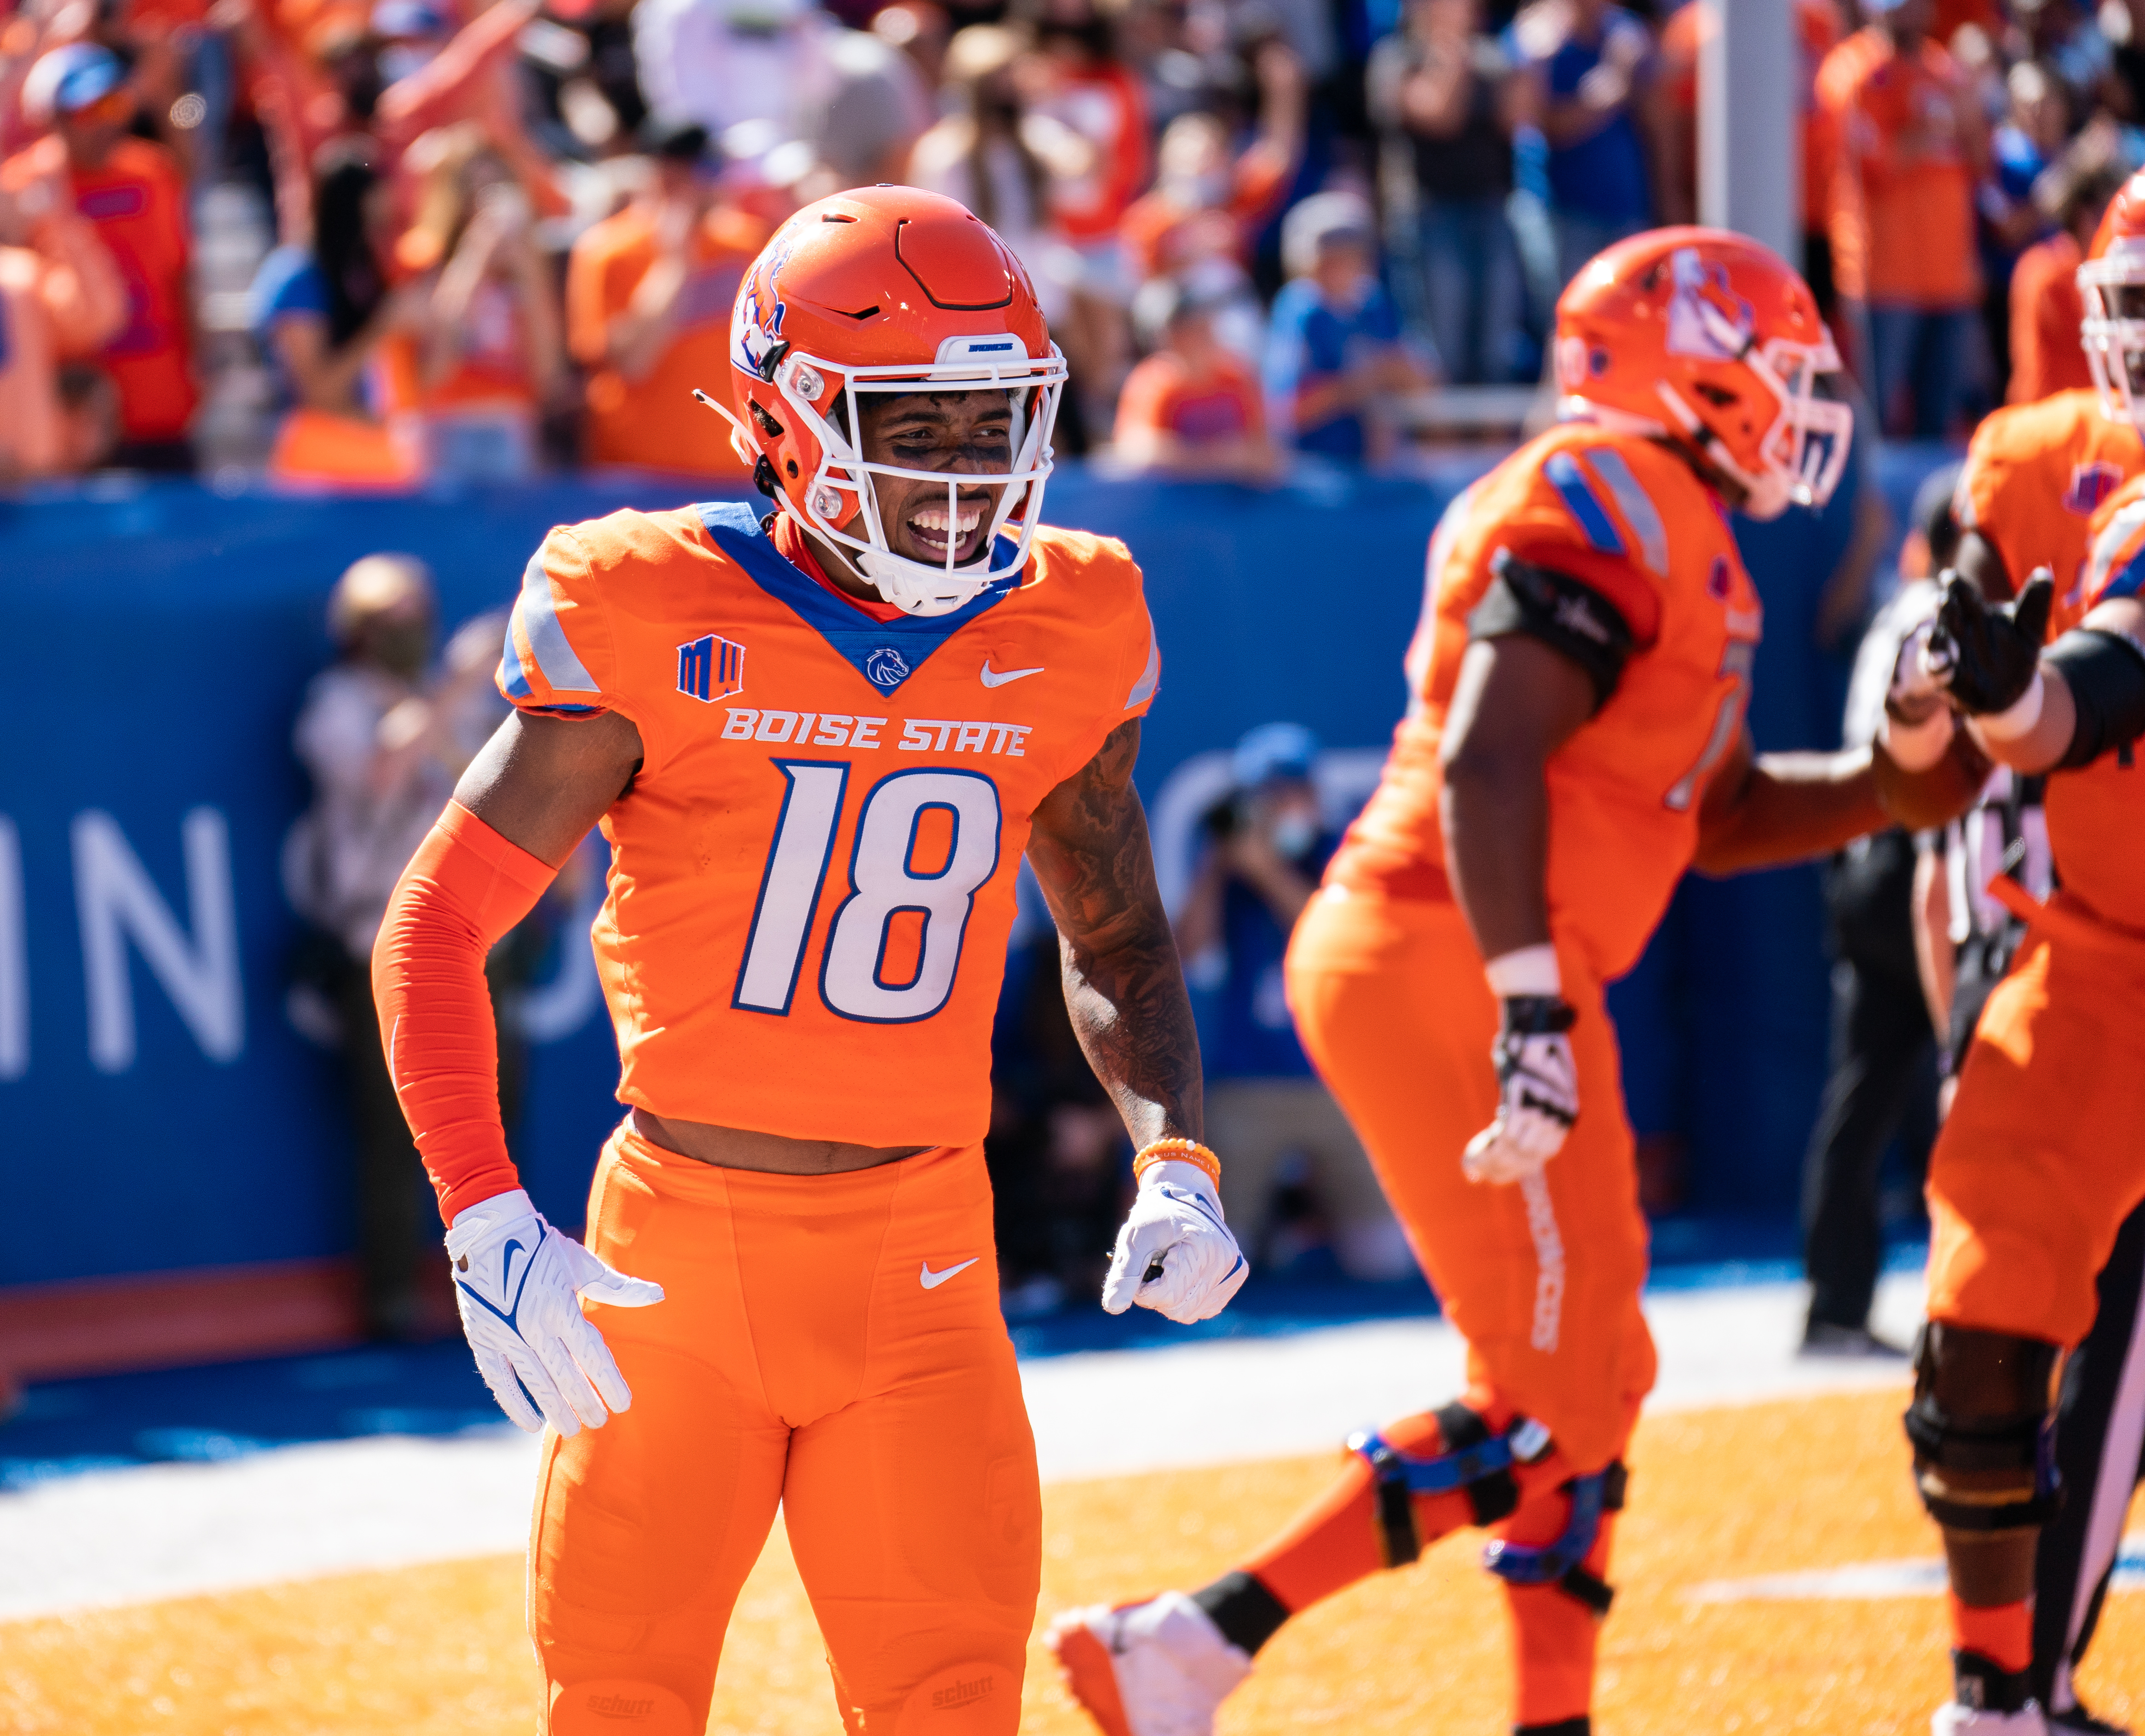 COLLEGE FOOTBALL: OCT 02 Nevada at Boise State